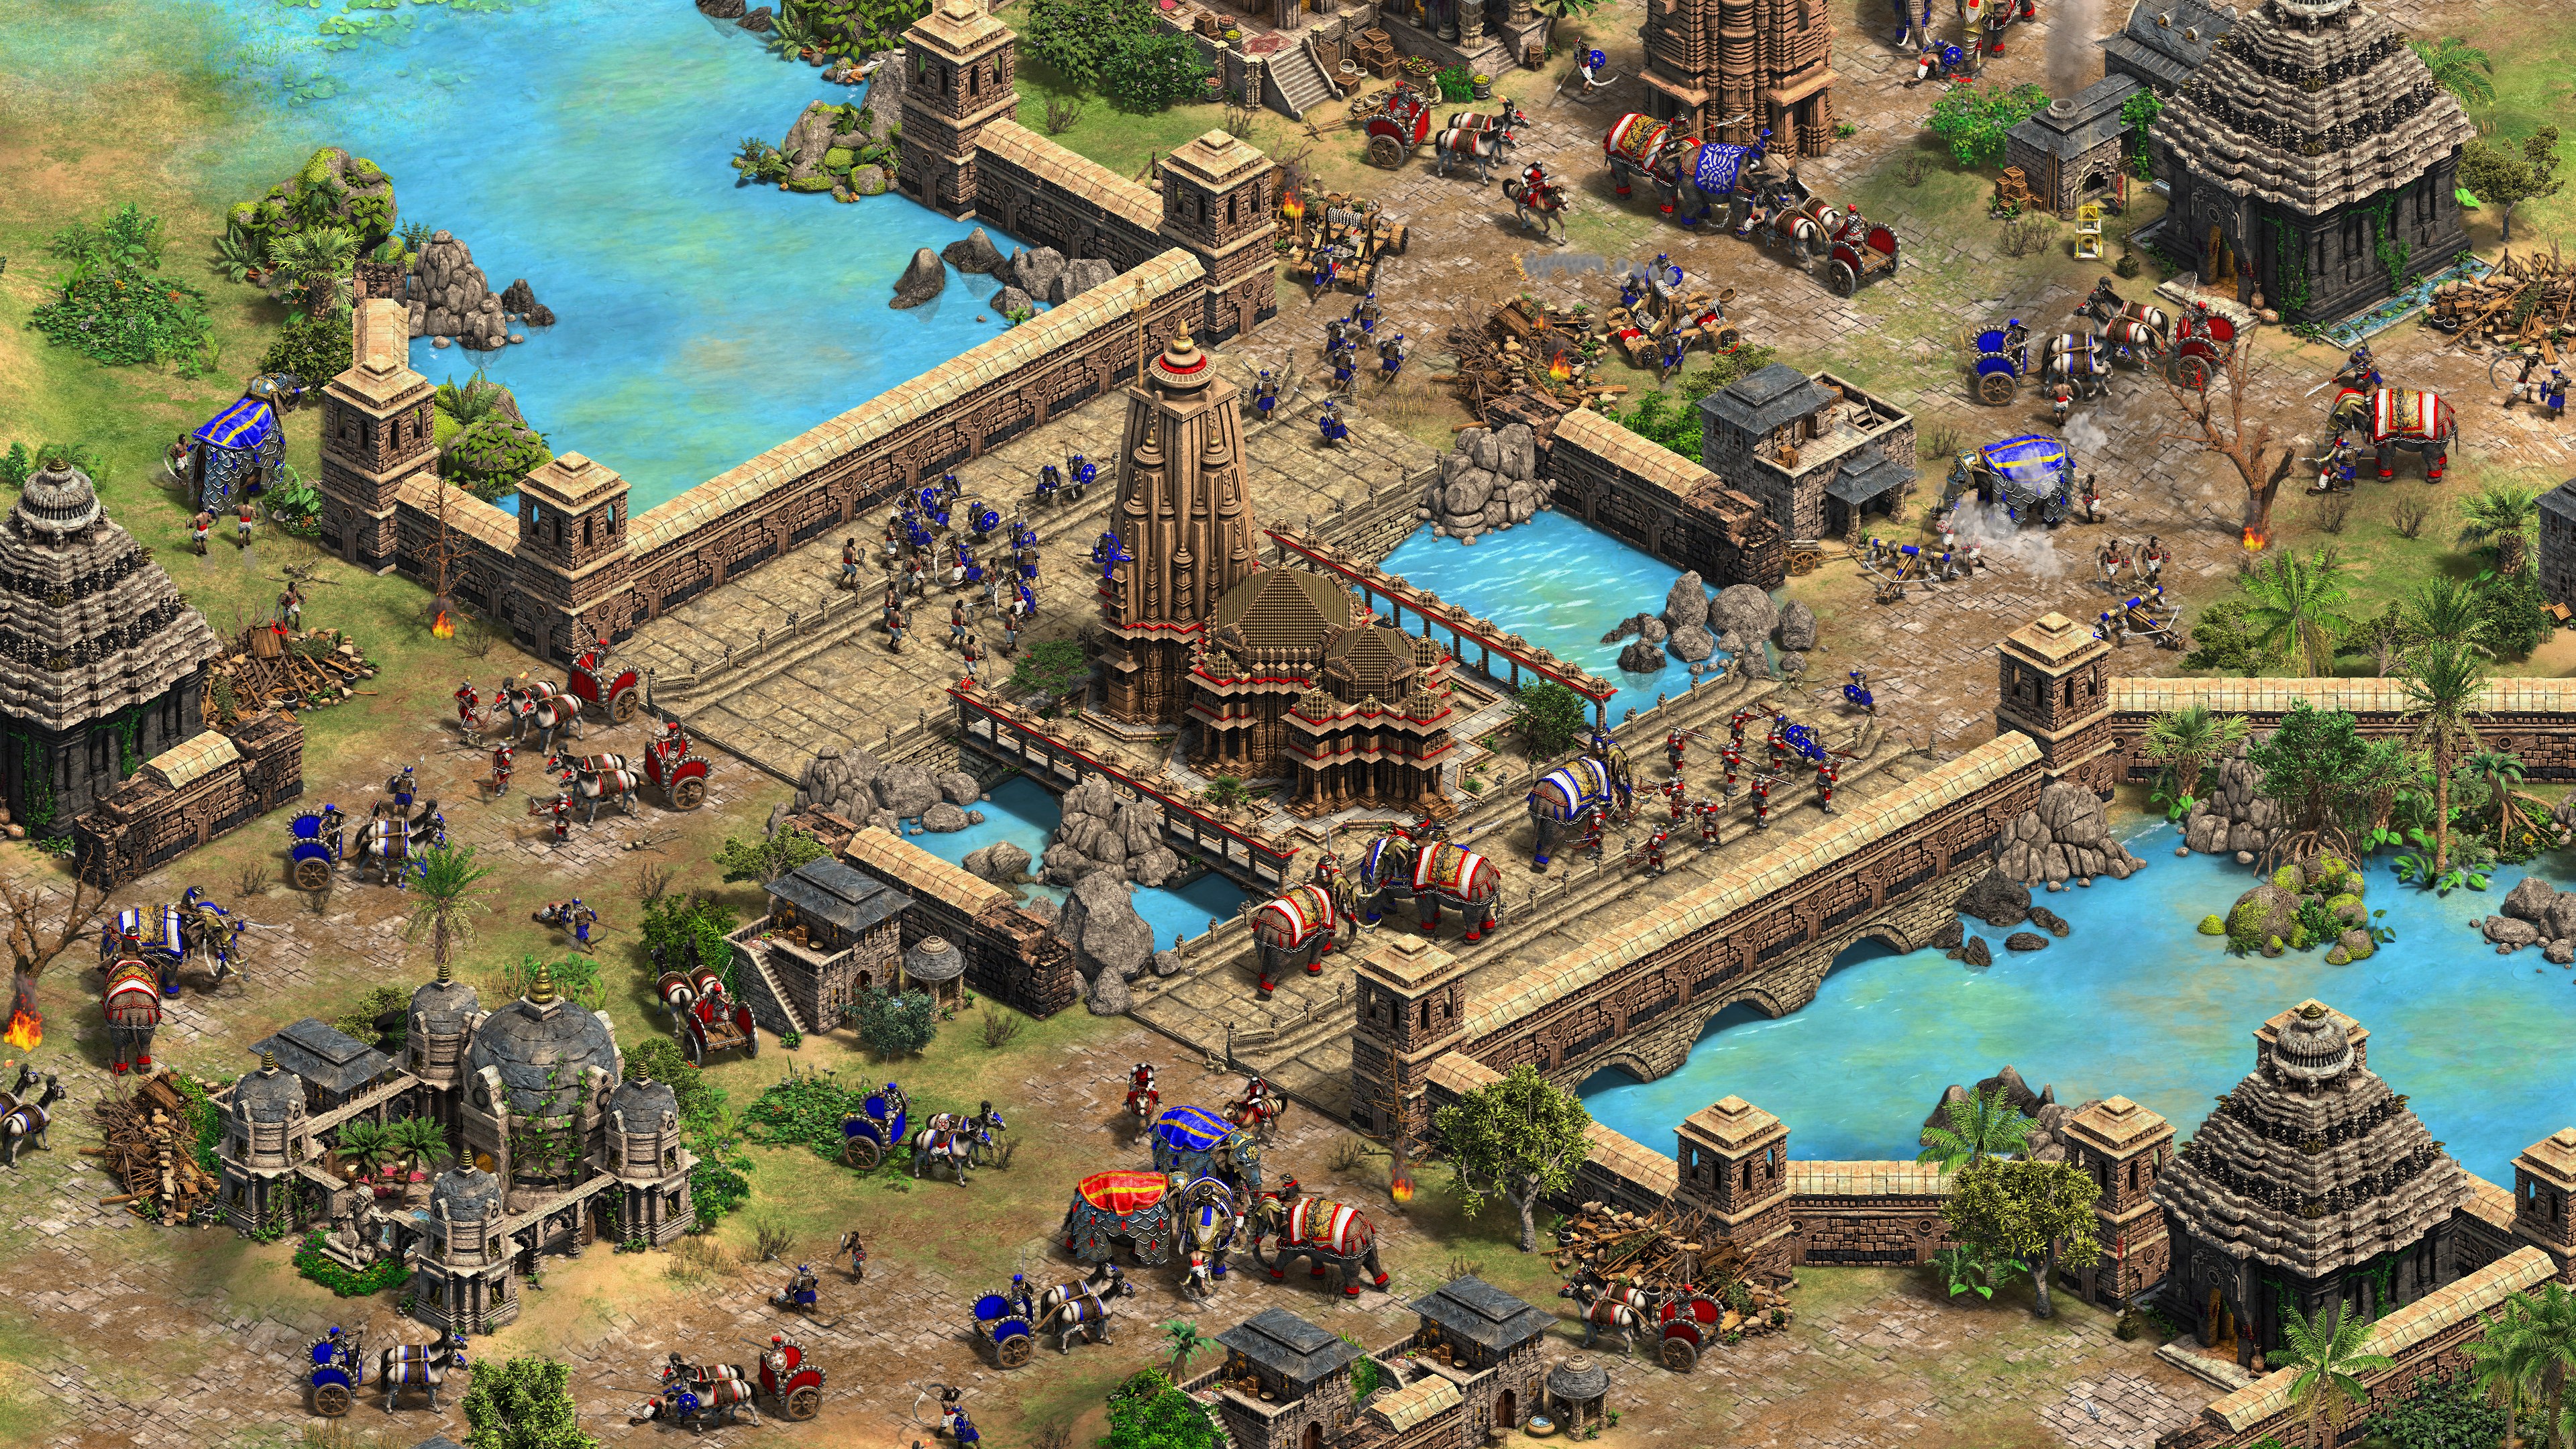 Age of Empires II: Definitive Edition - Dynasties of India screenshot 45687